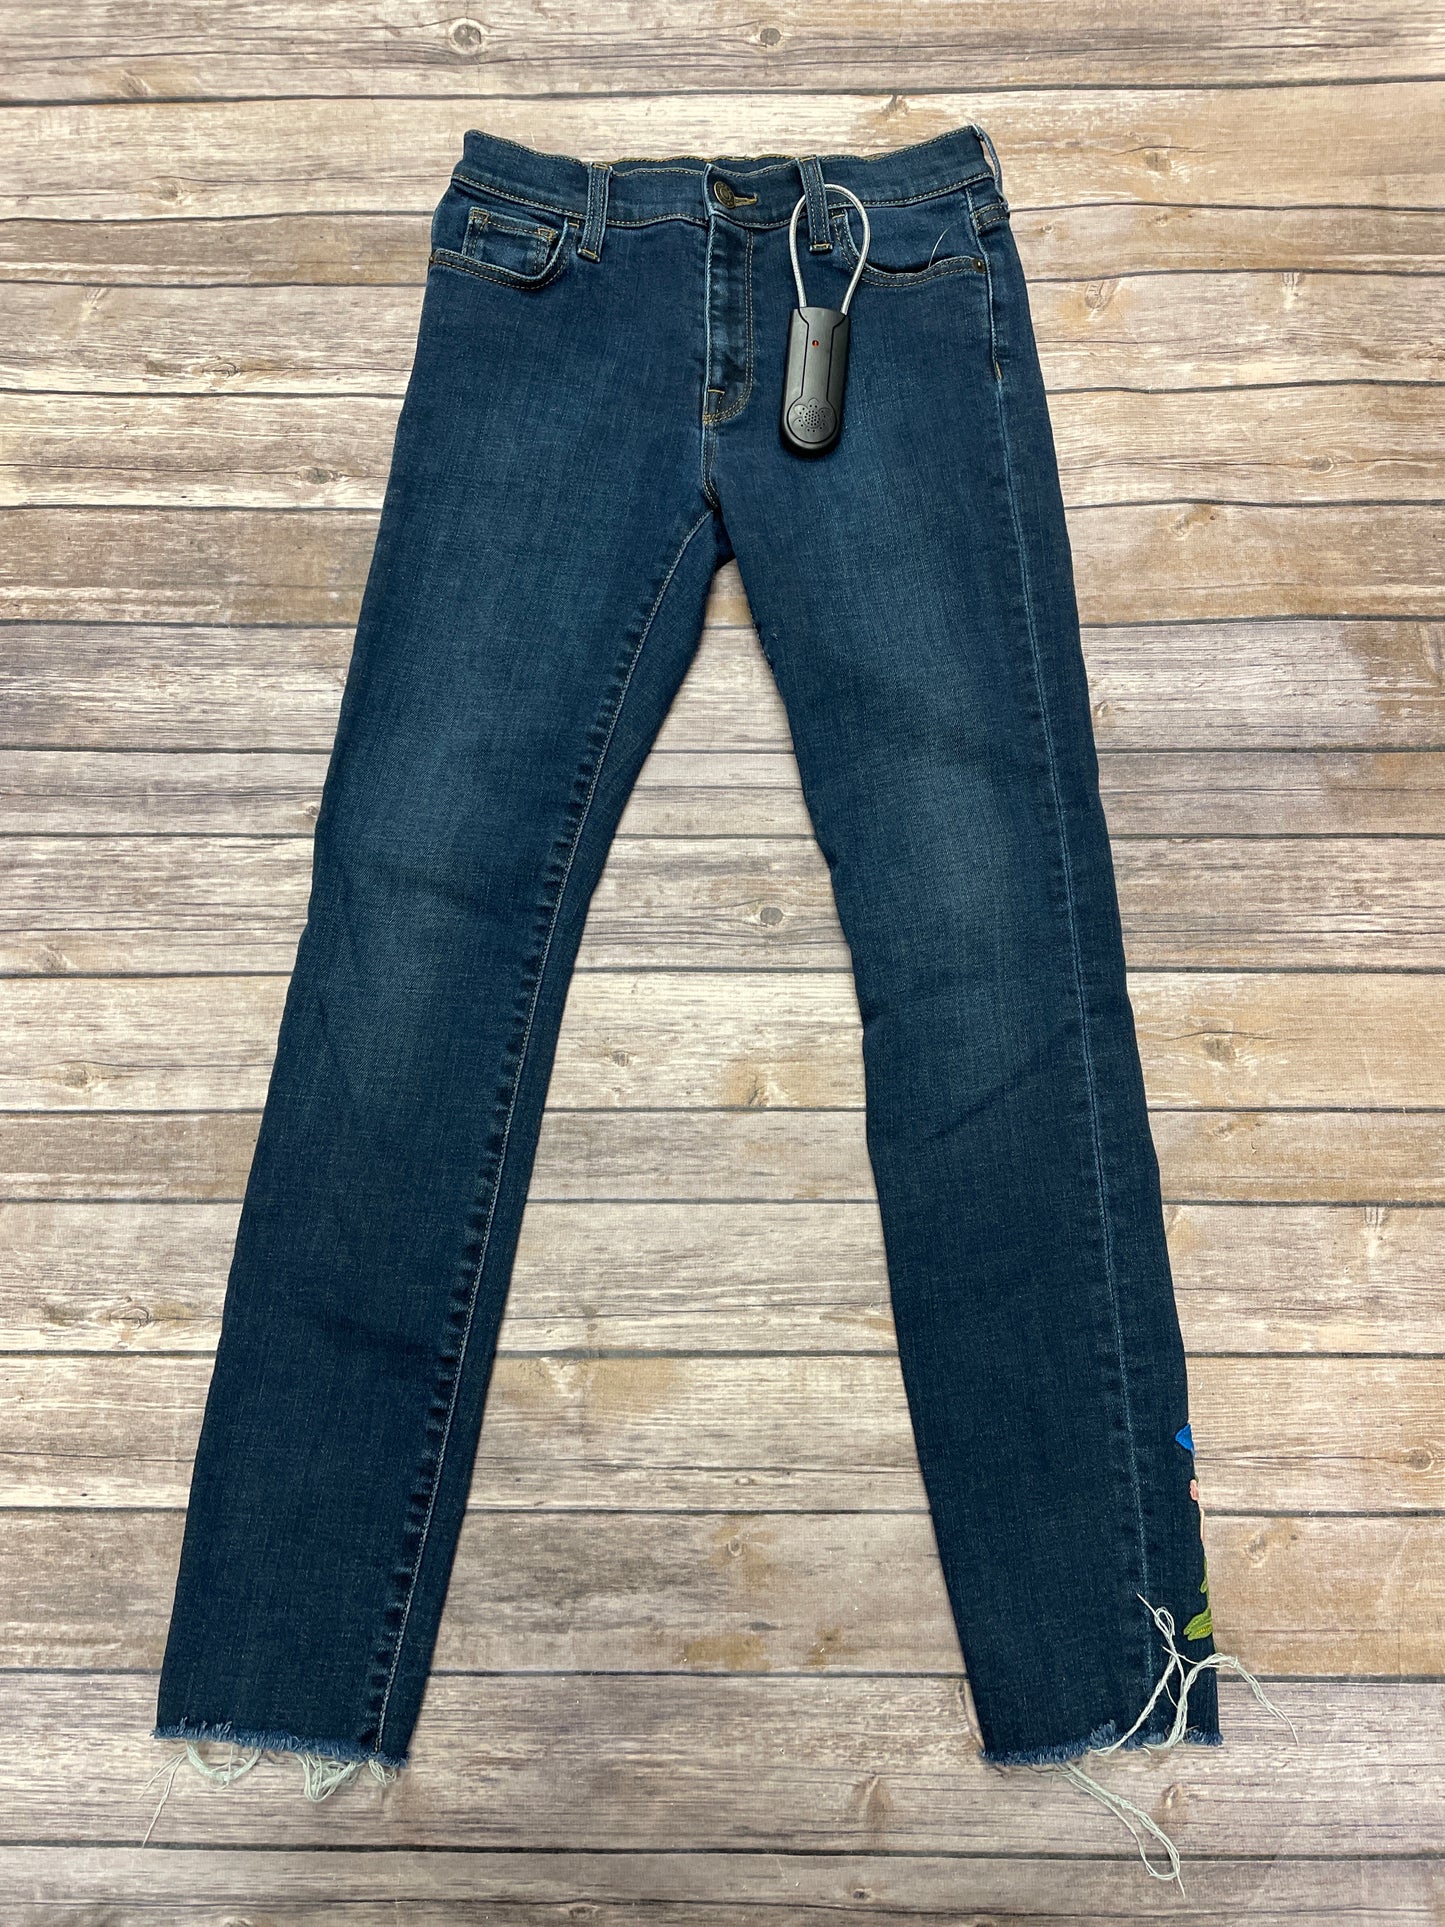 Jeans Designer By Gucci  Size: 0